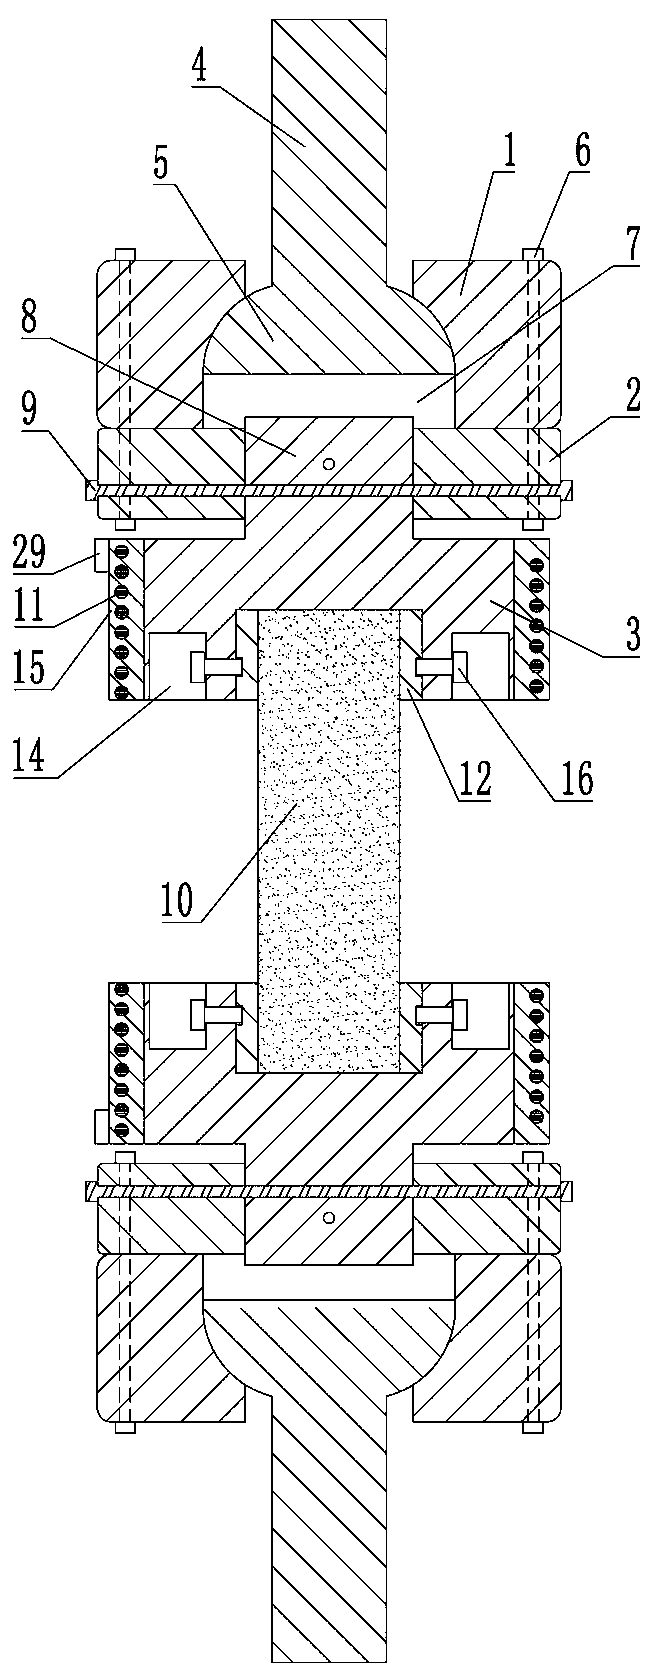 Method for quickly measuring tensile mechanical properties of rocks